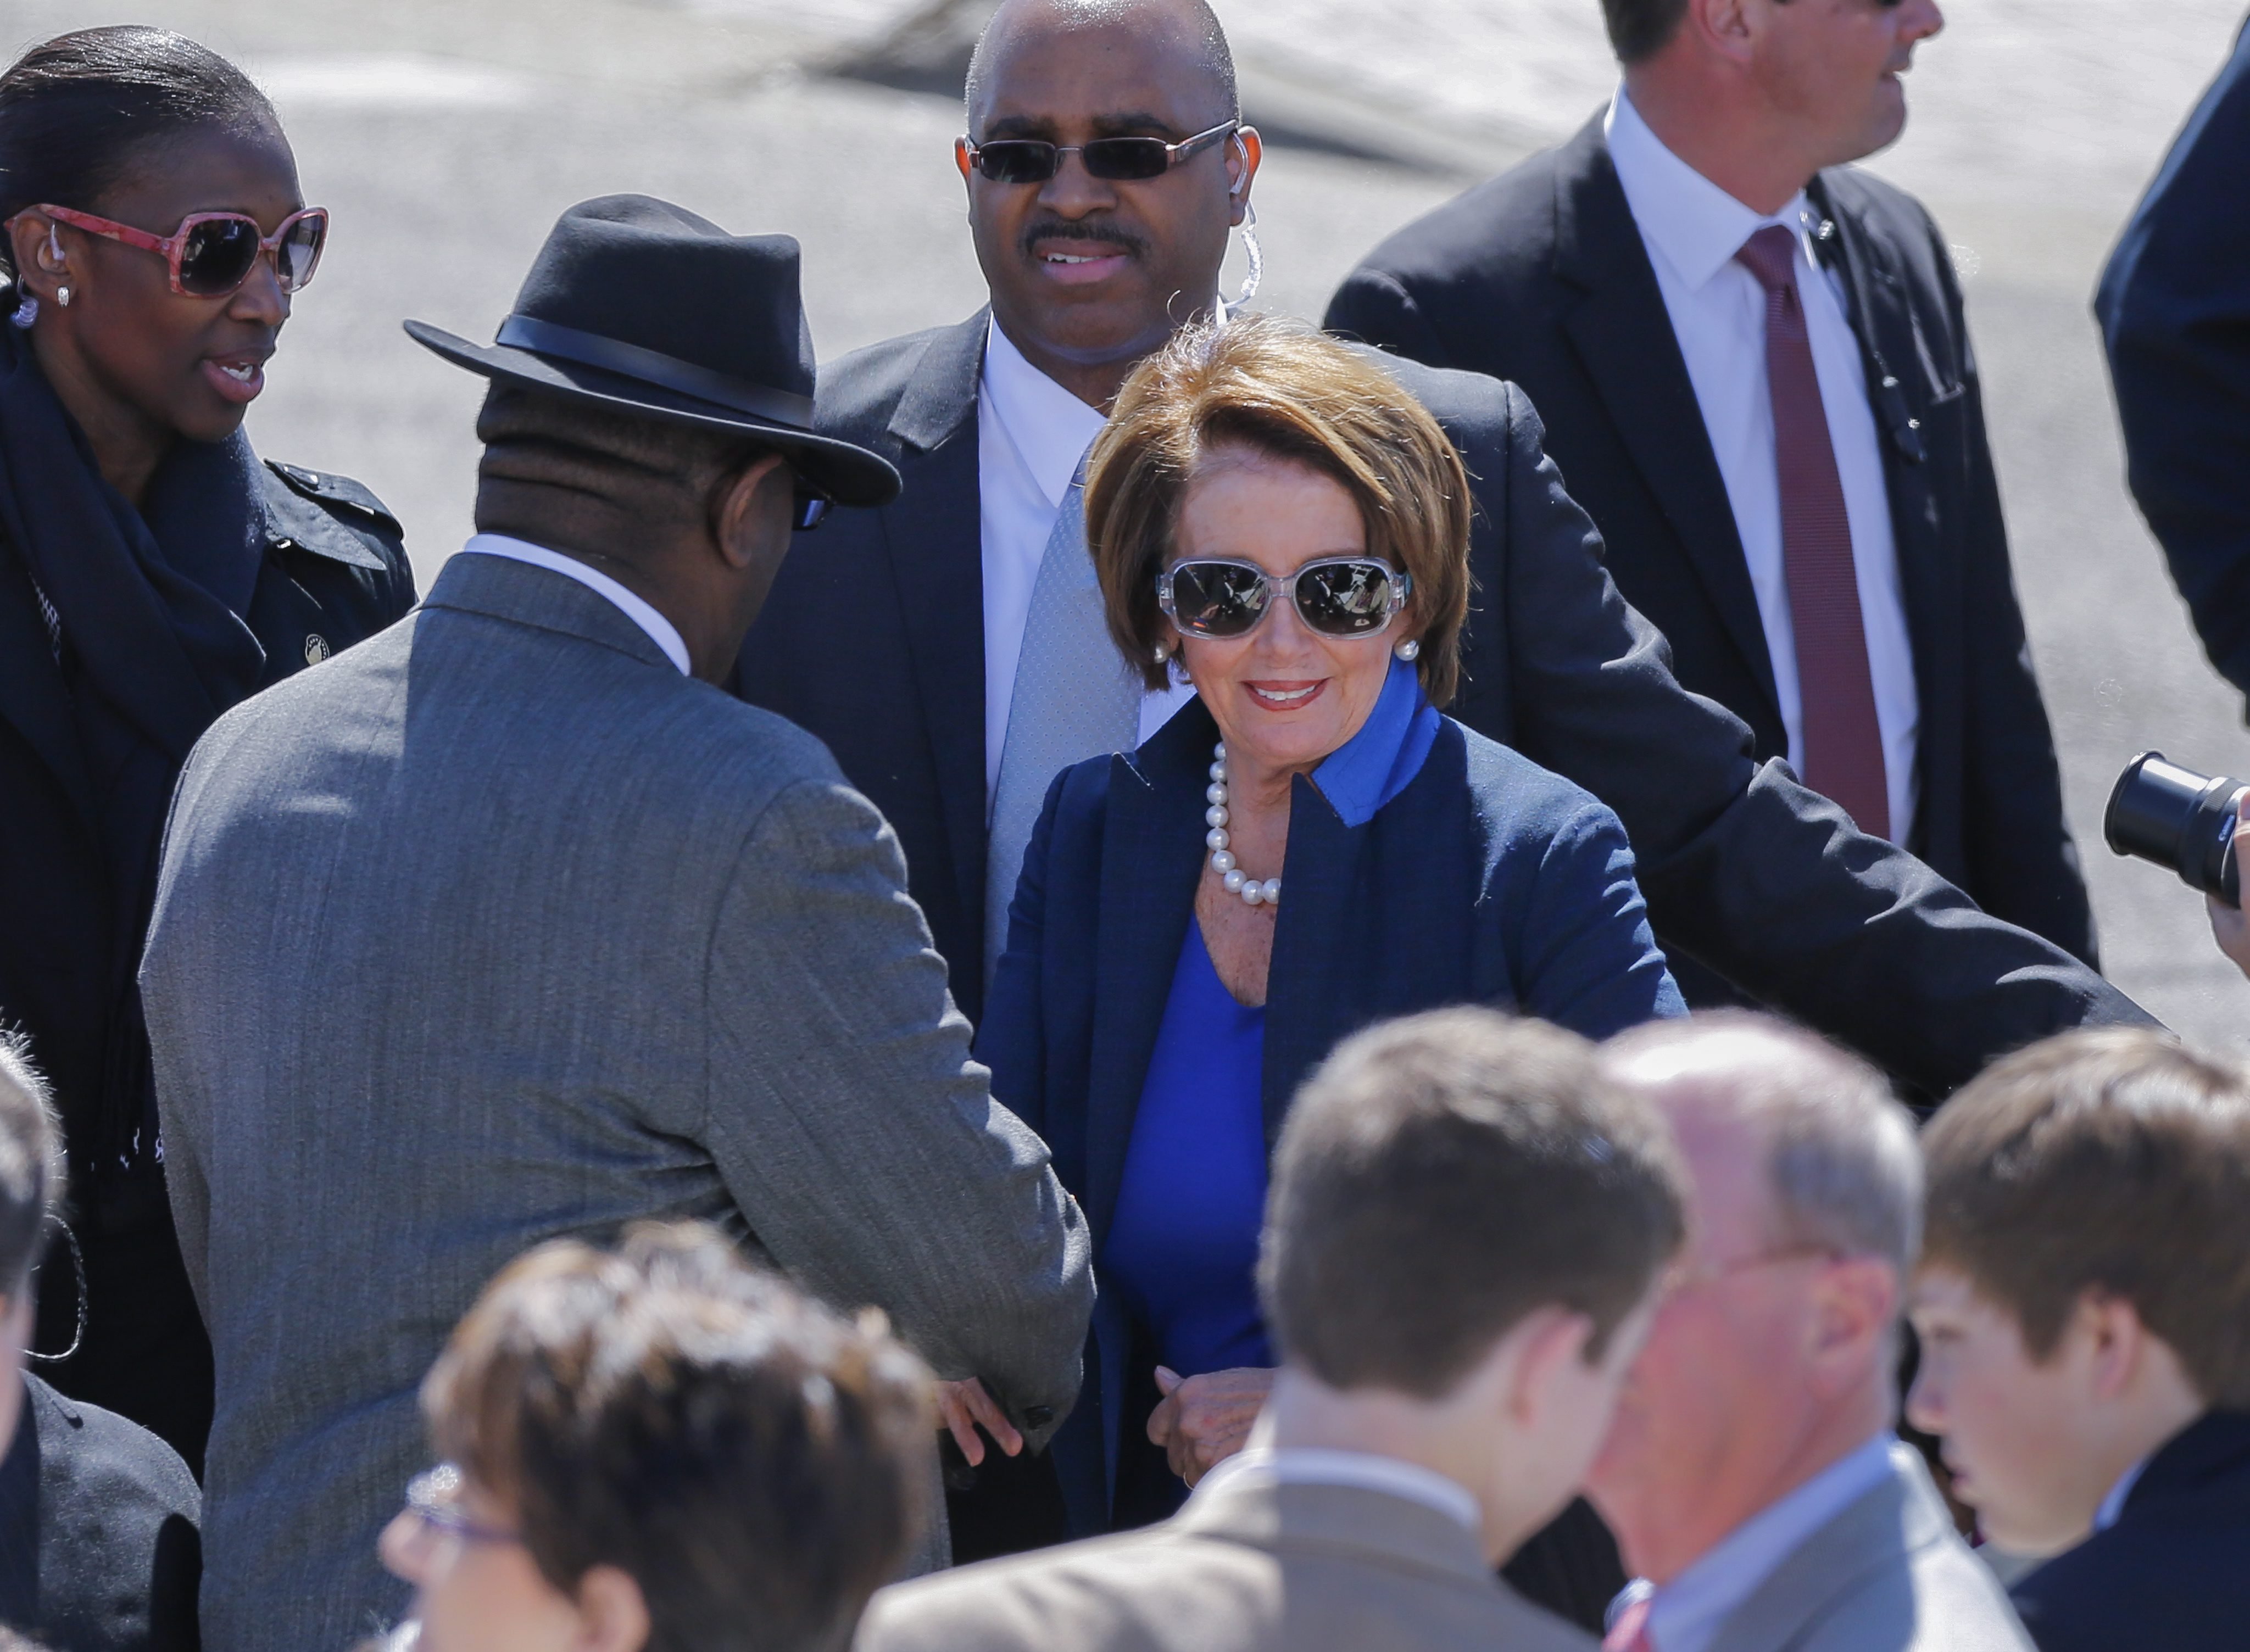 US House of Representative Minority Leader Nancy Pelosi arrives for activities commemorating the 50th anniversary of the Bloody Sunday crossing of the Edmund Pettus Bridge in Selma, Ala. on March 7, 2015. (Erik S. Lesser—EPA)